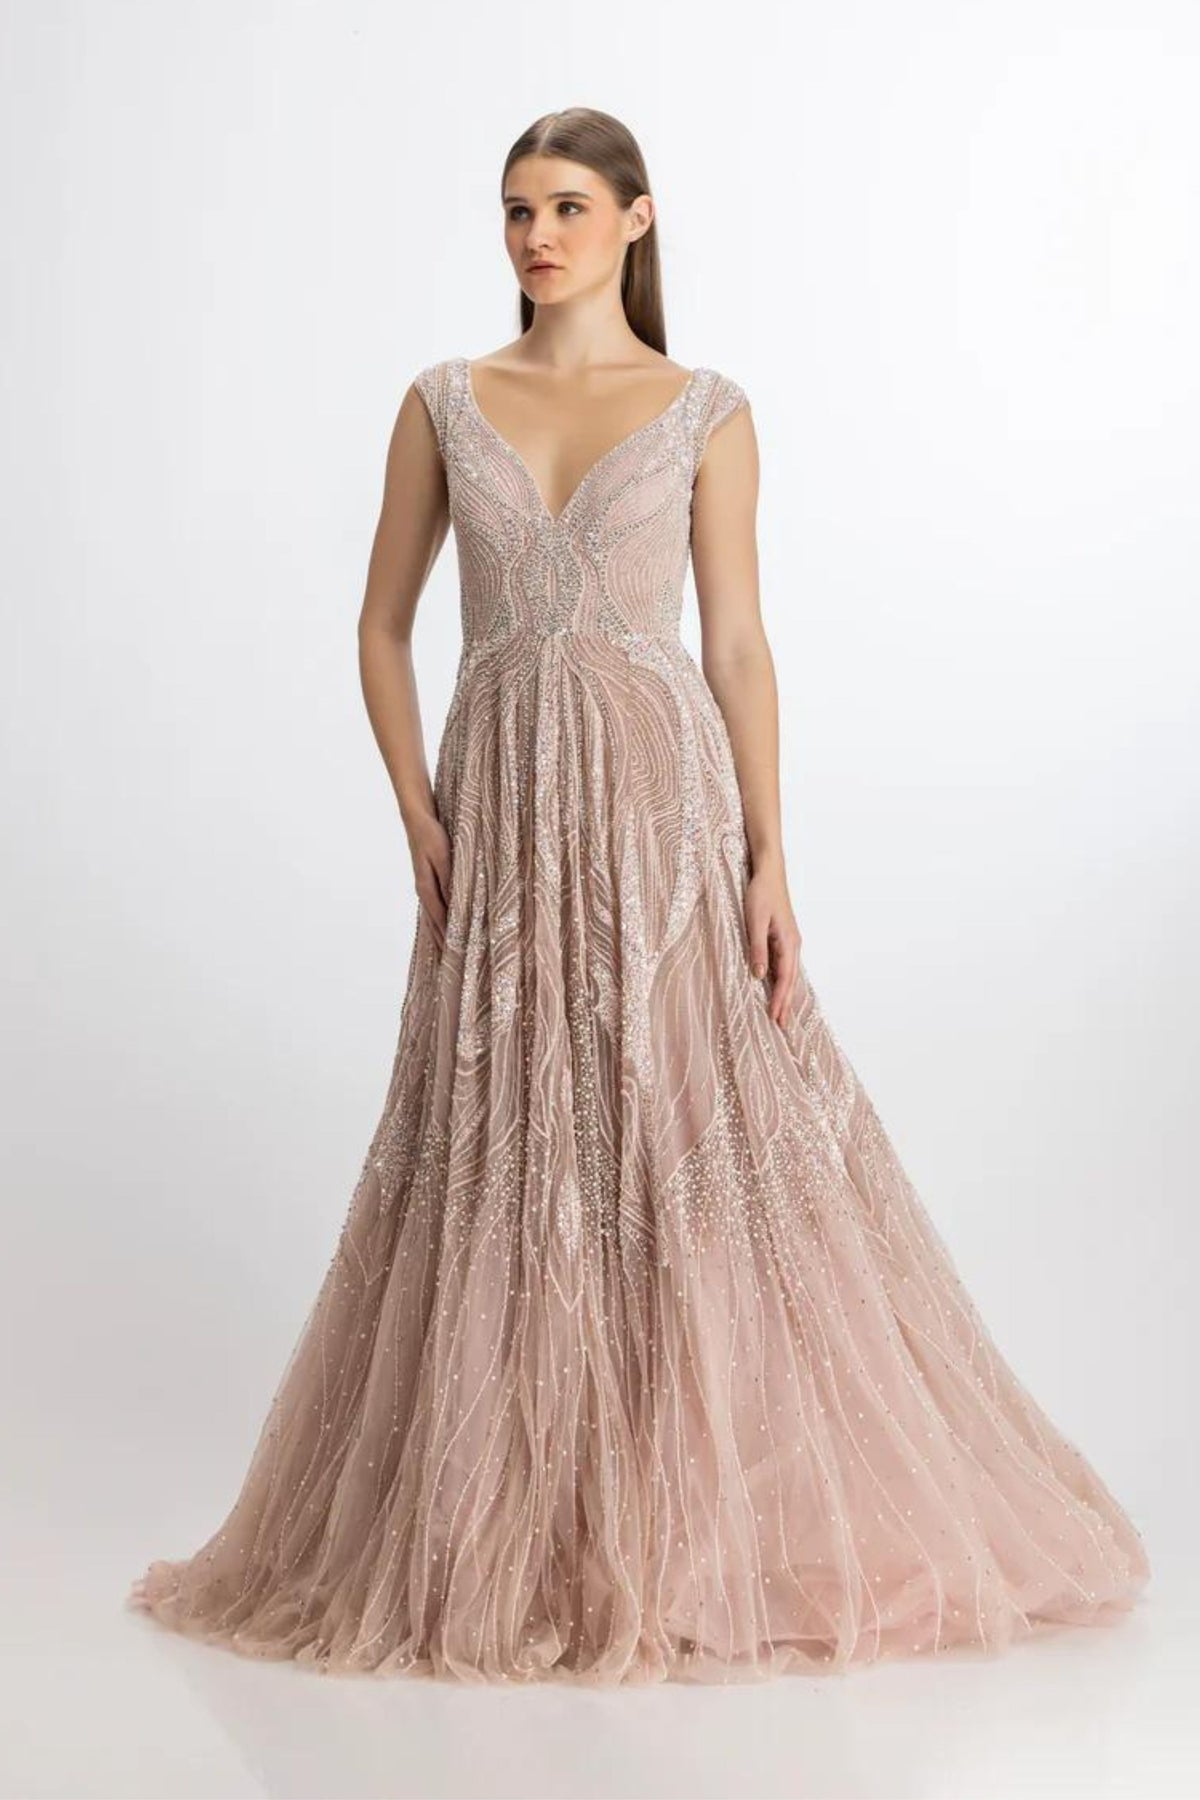 Silver pink flafred gown